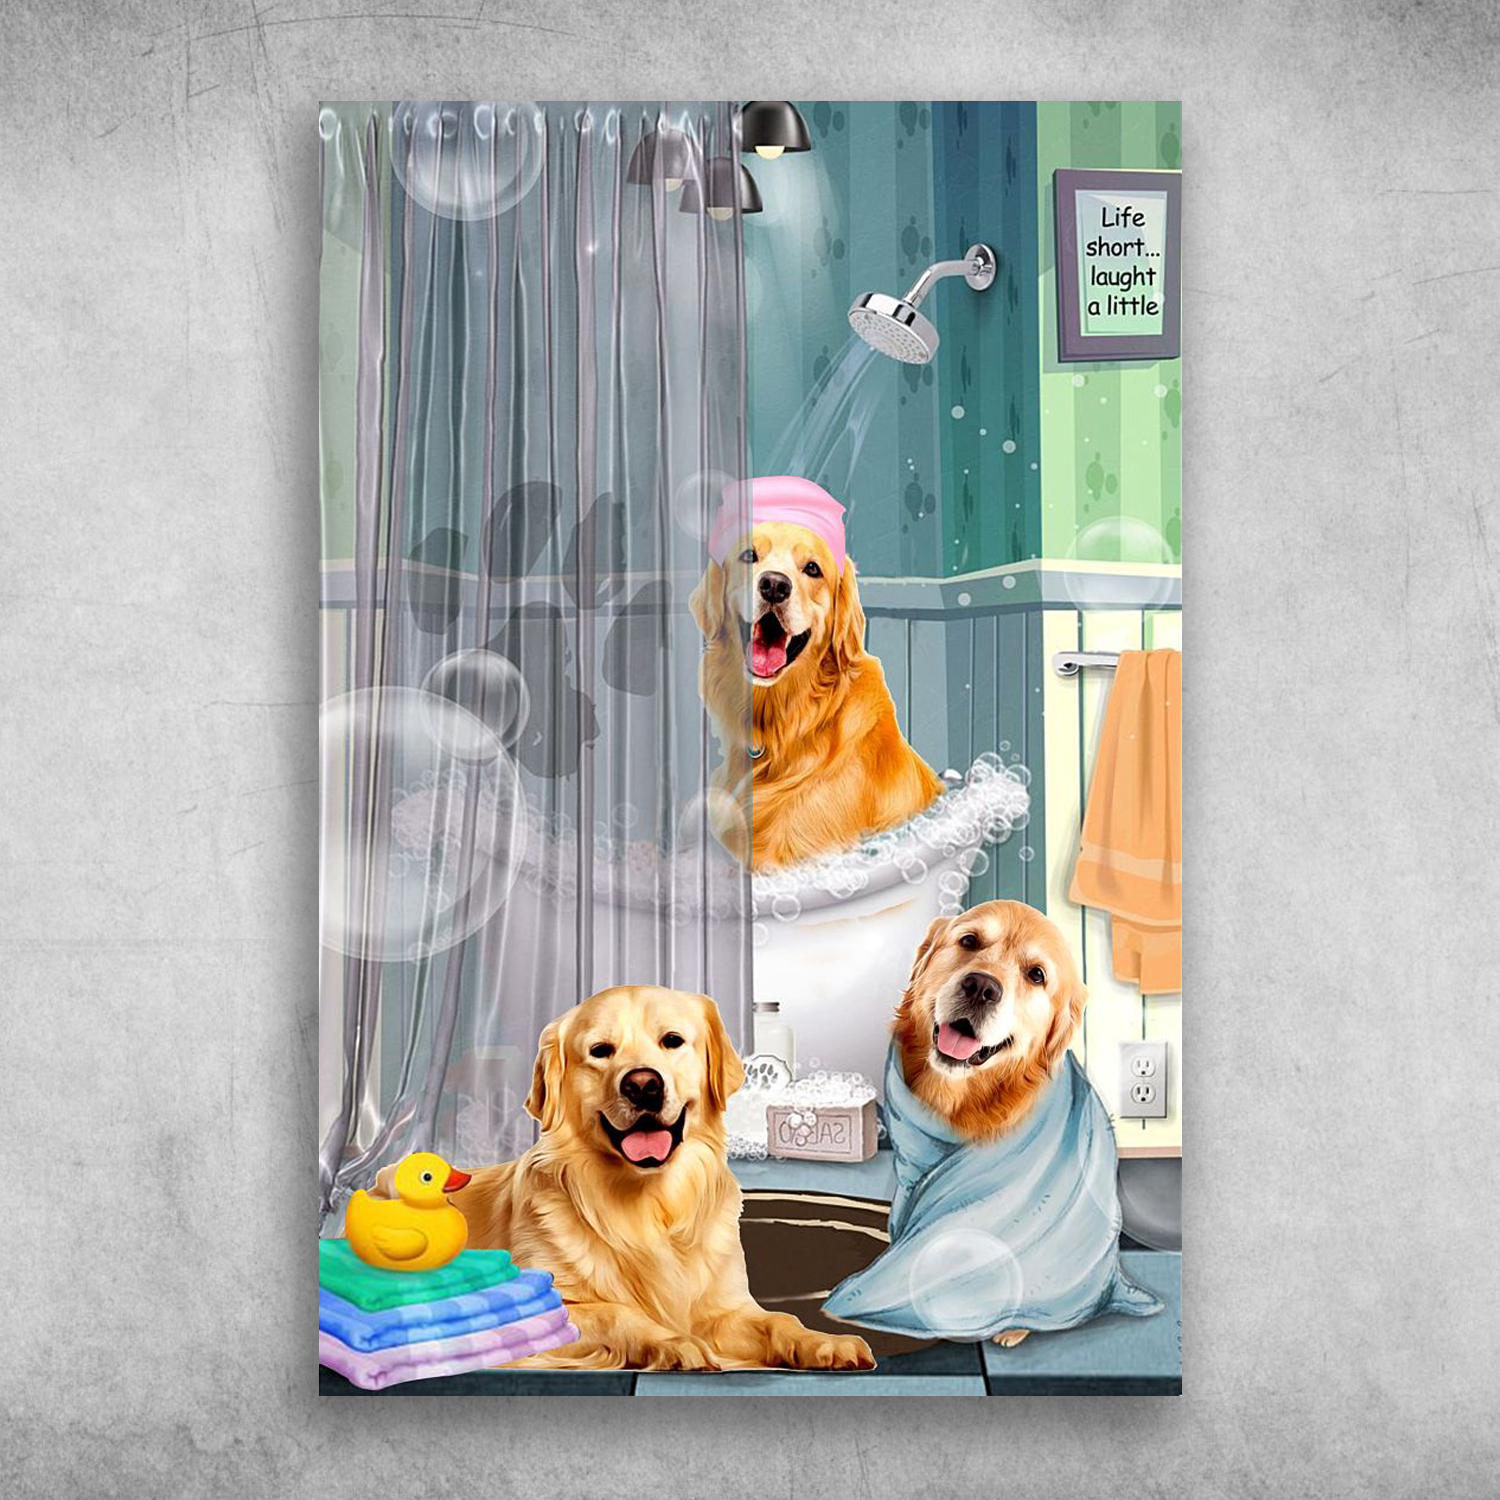 Golden Retriever Relaxing In The Bath Tub Life Short Laught A Little